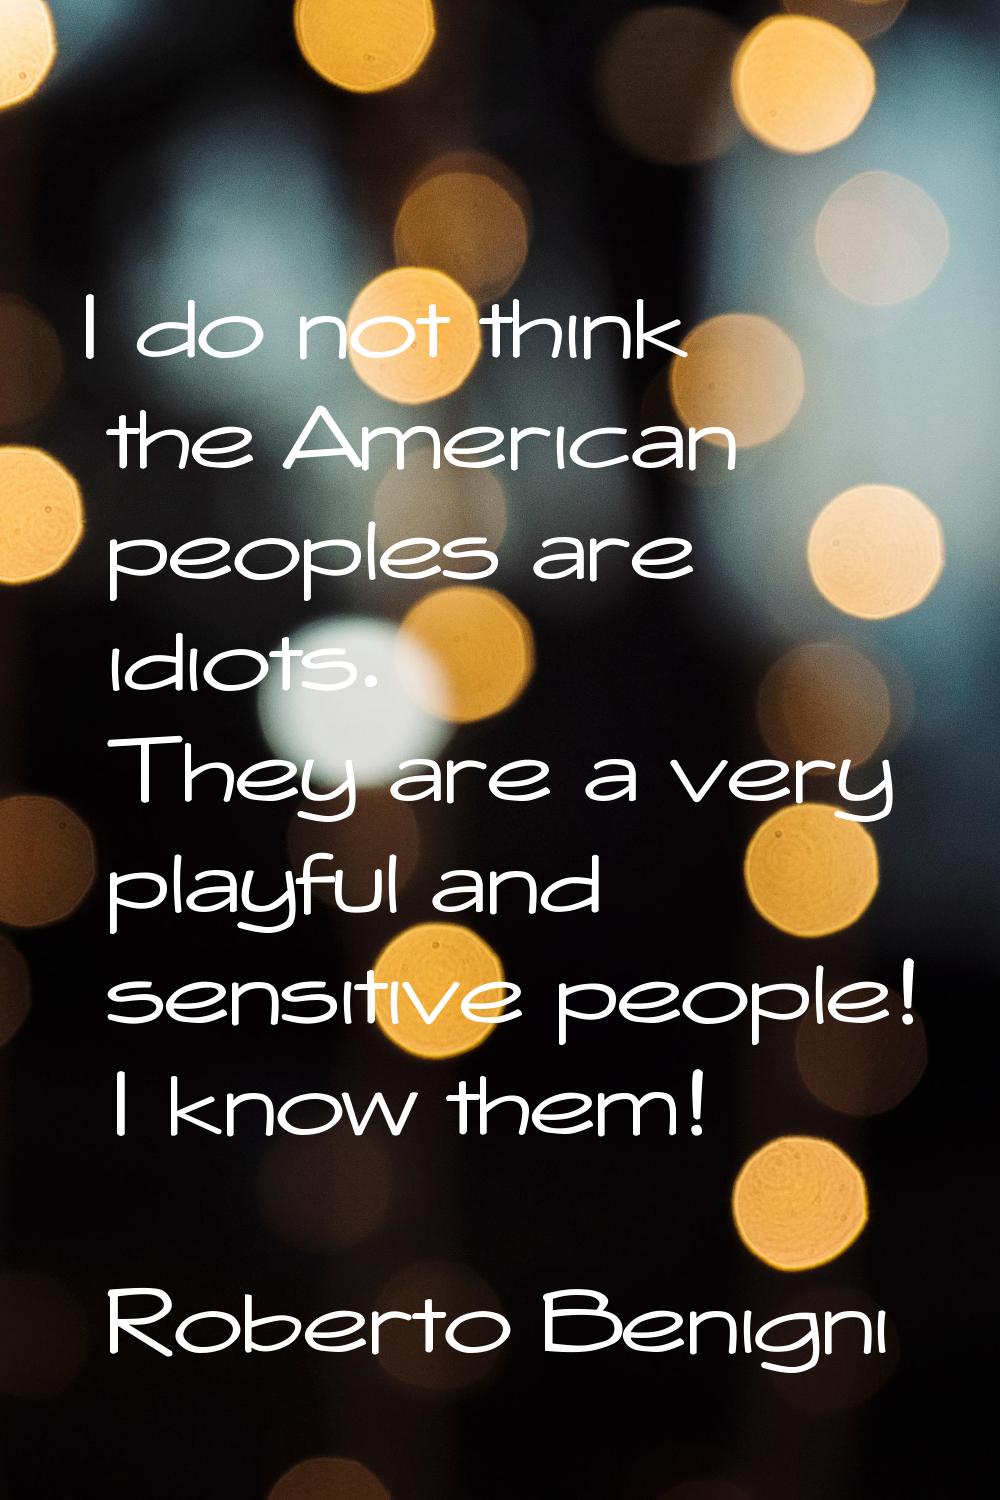 I do not think the American peoples are idiots. They are a very playful and sensitive people! I kno